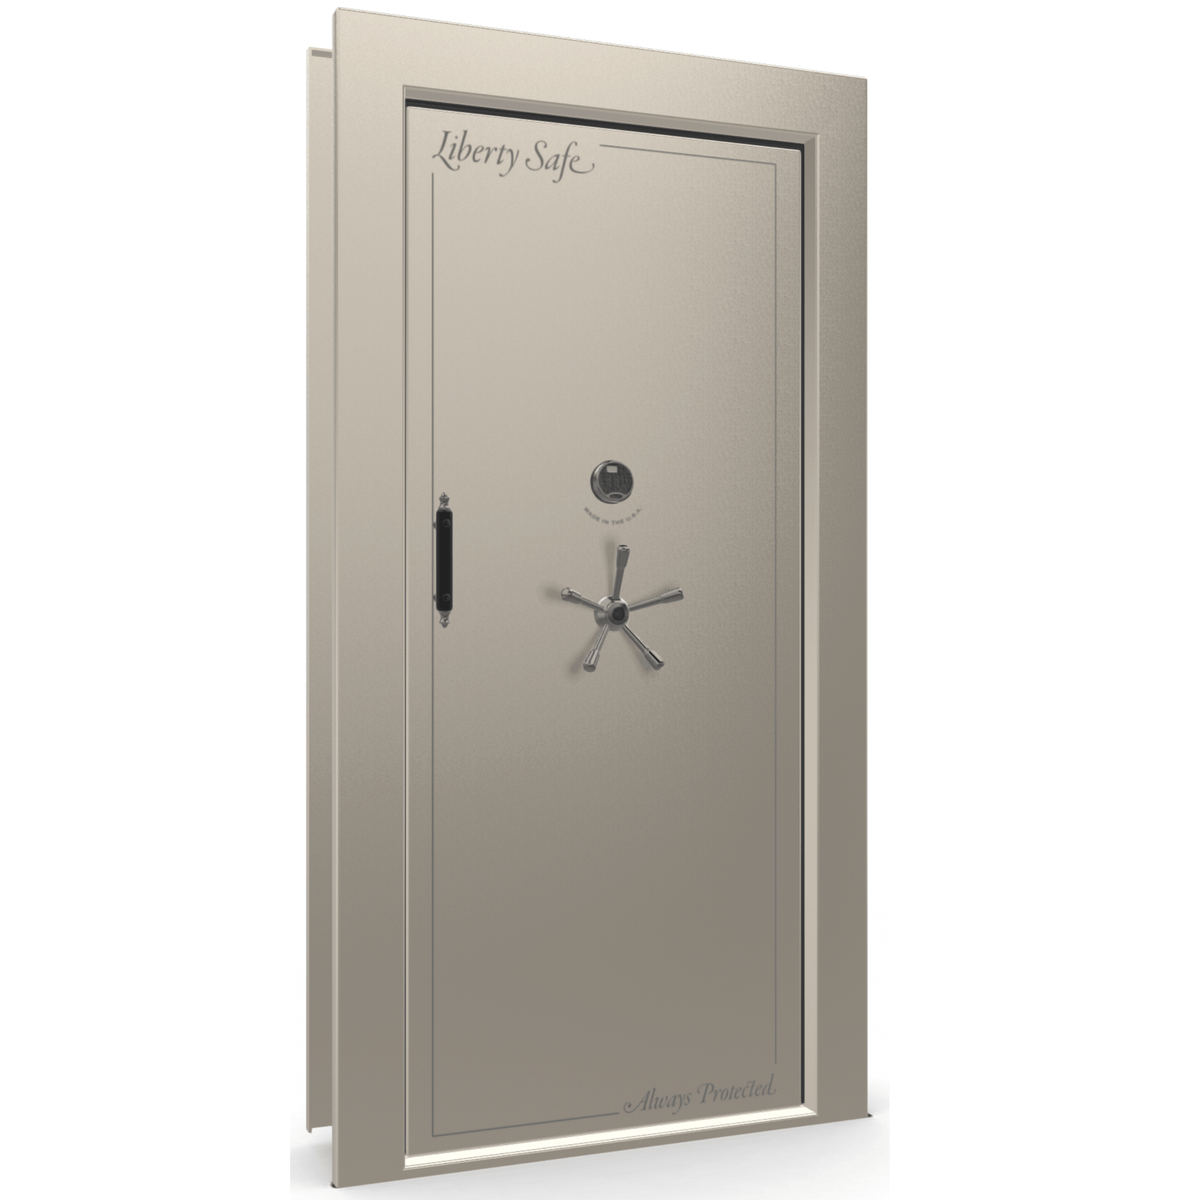 The Beast Vault Door in Champagne Gloss with Black Chrome Electronic Lock, Right Inswing, door closed.